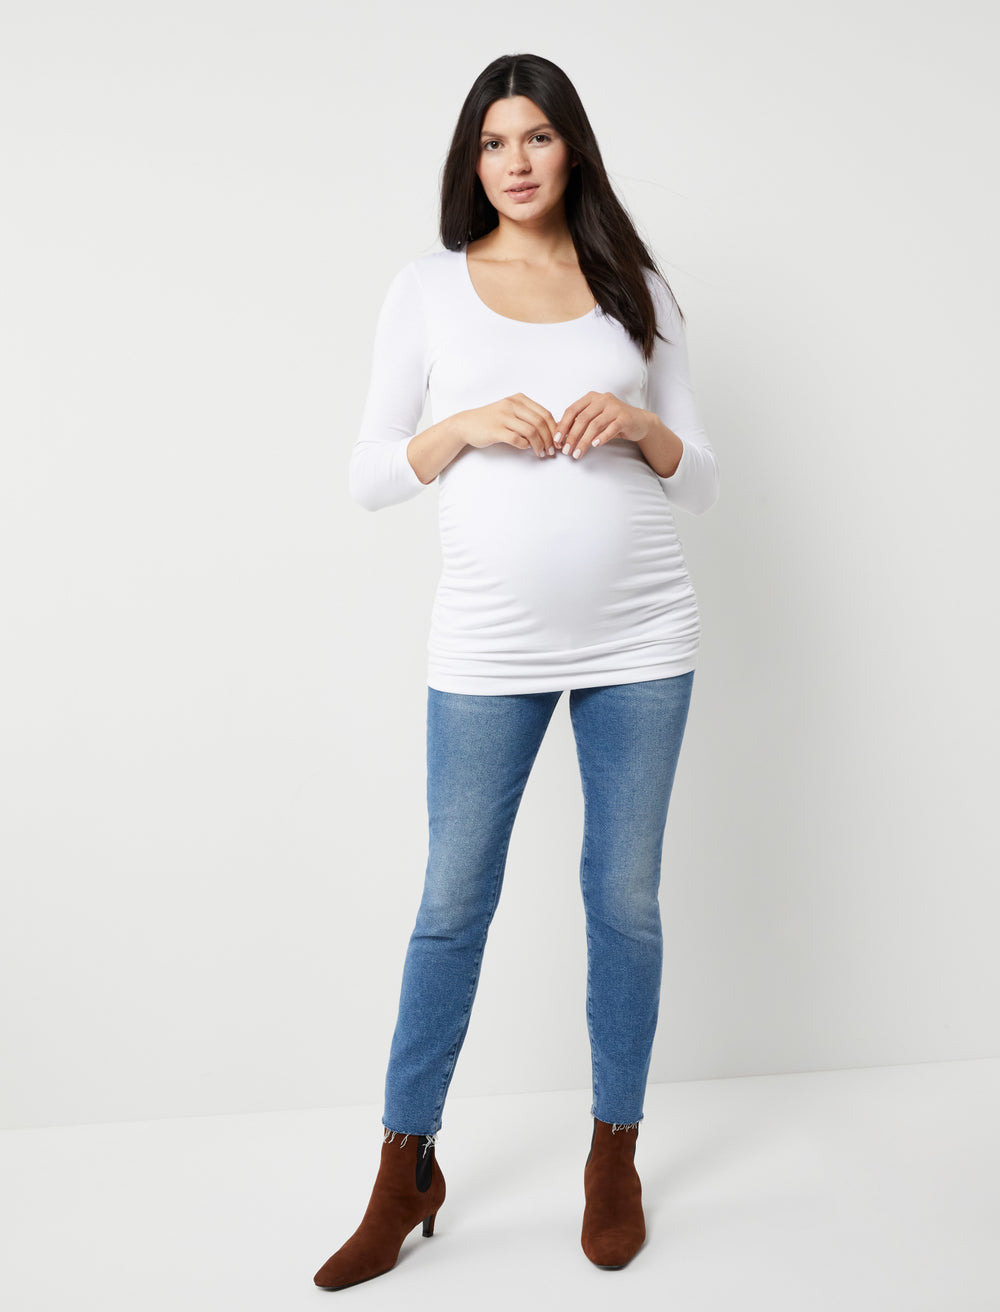 New Short Sleeved Nursing Maternity Top with Ruched Sides T-Shirt Soft &  Comfy